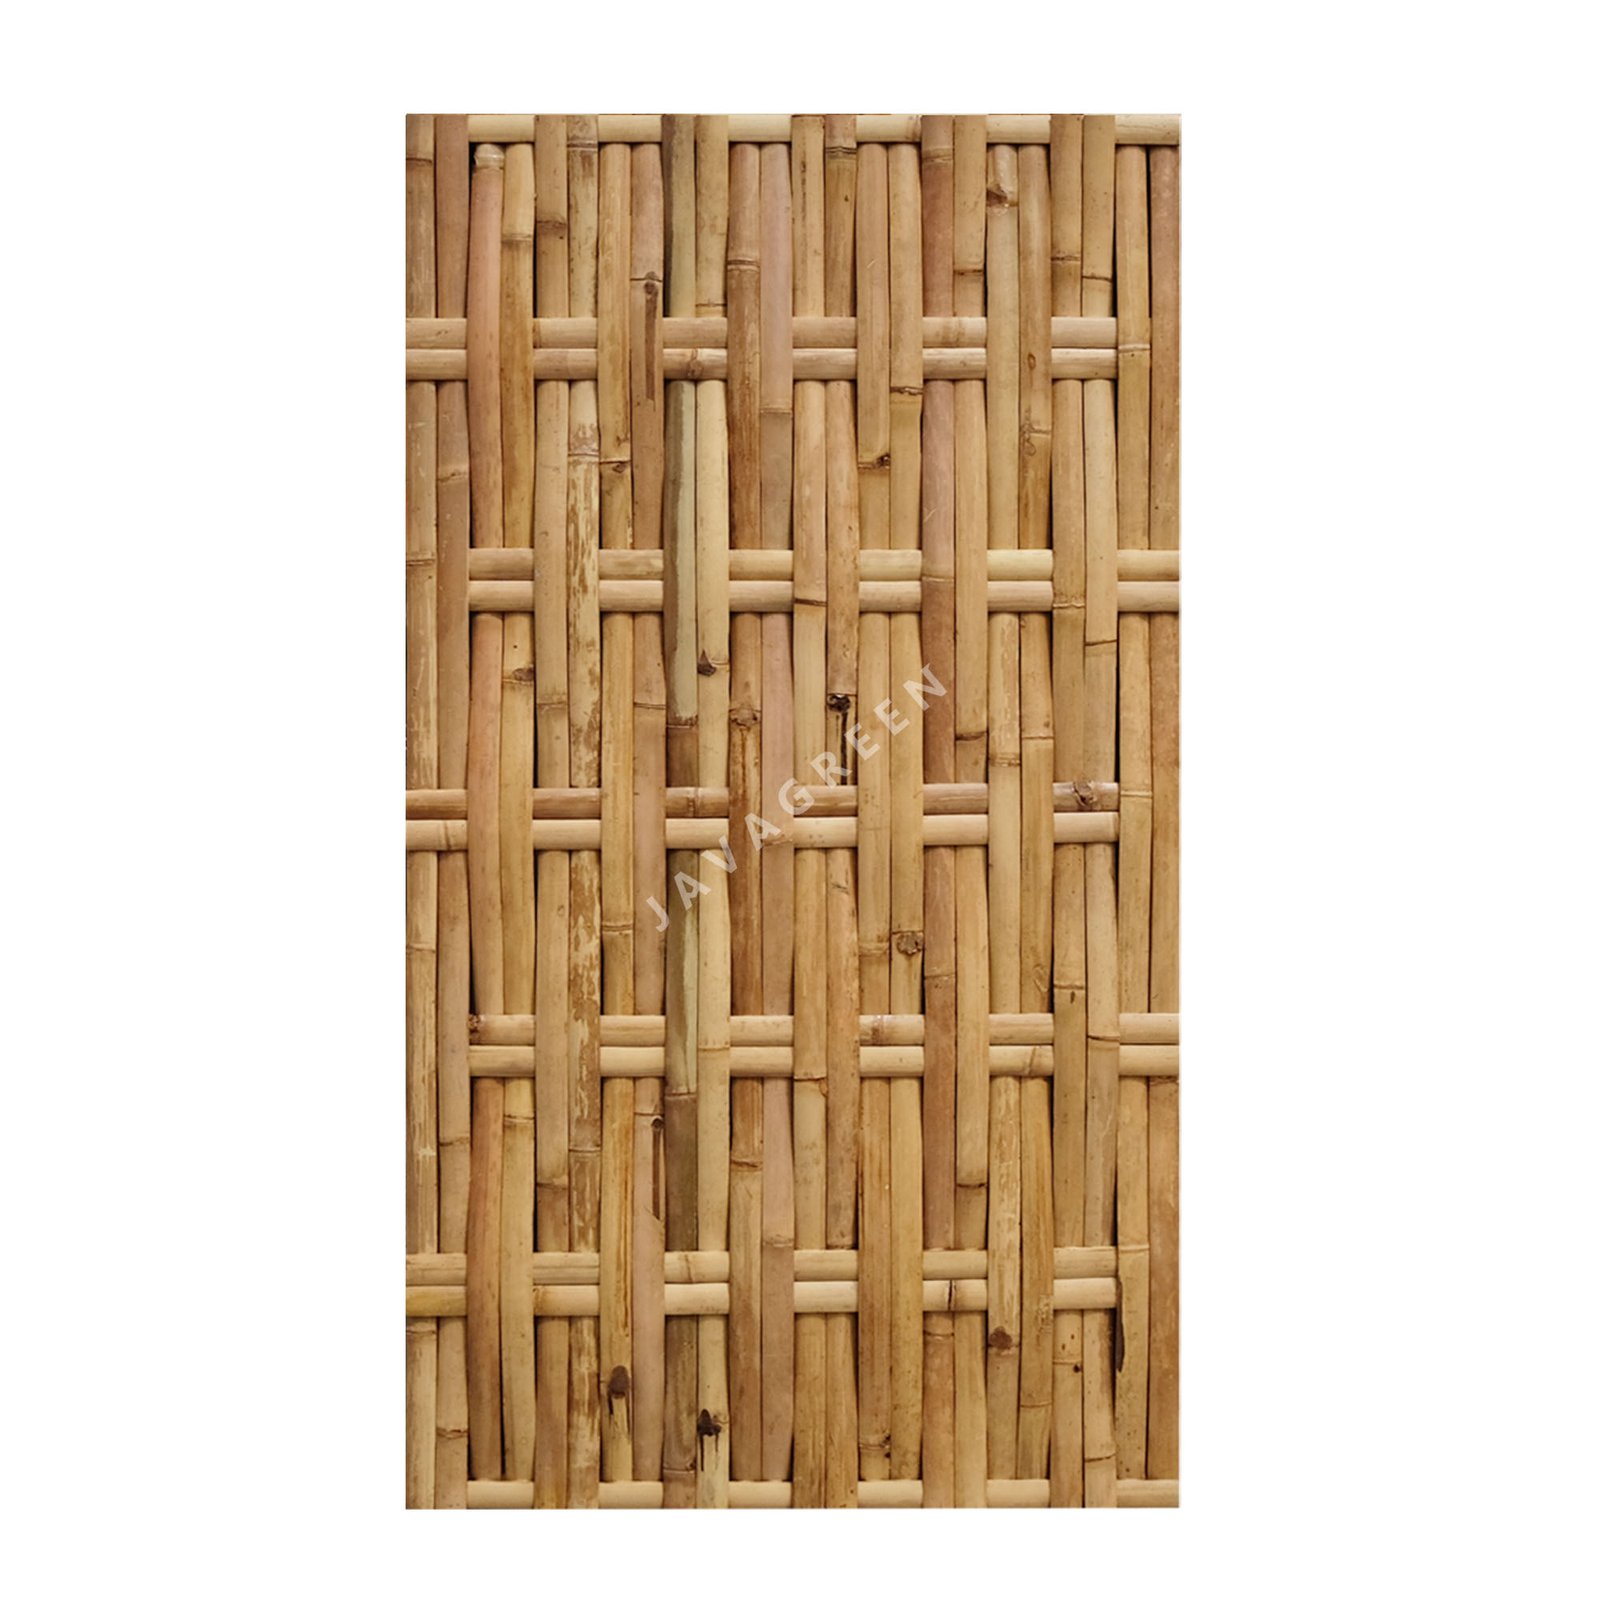 Bamboo Weave Fence 2